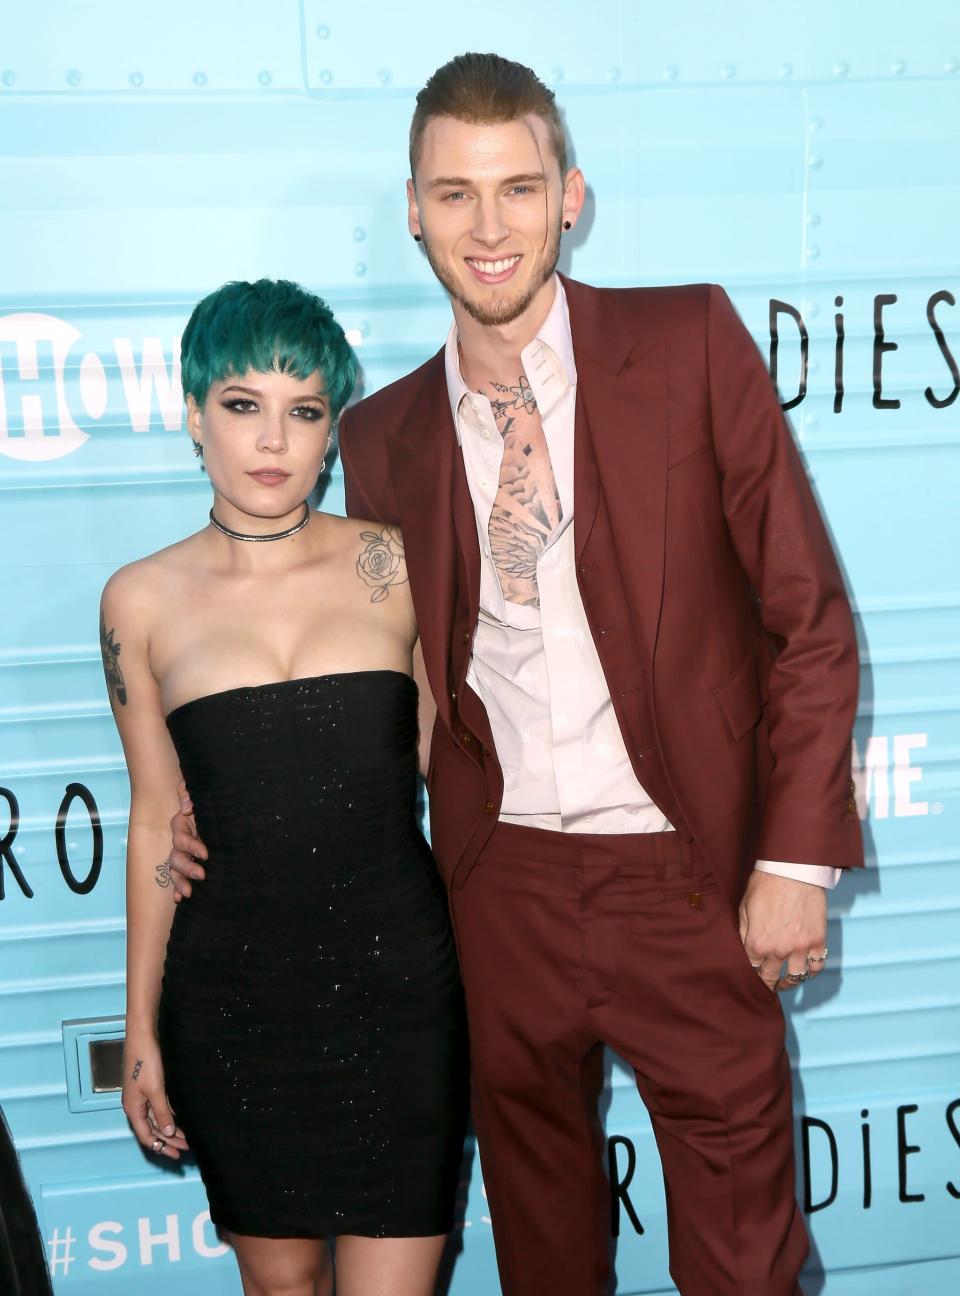 <p>The rapper was linked to Halsey in March 2017 when they were <a href="https://twitter.com/PopCrave/status/1016354765058592774?s=20" class="link " rel="nofollow noopener" target="_blank" data-ylk="slk:spotted at the beach together">spotted at the beach together</a>. Photos of their tropical outing resurfaced in July 2018, <a href="https://www.billboard.com/articles/news/8464524/halsey-machine-gun-kelly-dating-rumors" class="link " rel="nofollow noopener" target="_blank" data-ylk="slk:prompting Halsey to deny dating rumors">prompting Halsey to deny dating rumors</a>. Two months after she debunked the relationship, MGK confirmed in an interview with <strong>The Breakfast Club</strong> that they weren't dating but <a href="https://youtu.be/Le0u232ODx8" class="link " rel="nofollow noopener" target="_blank" data-ylk="slk:had previously been intimate">had previously been intimate</a>. In September 2020, the pair reunited for their song "<a href="http://www.youtube.com/watch?v=7gVNNPv8w4Q" class="link " rel="nofollow noopener" target="_blank" data-ylk="slk:Forget Me Too">Forget Me Too</a>."</p>